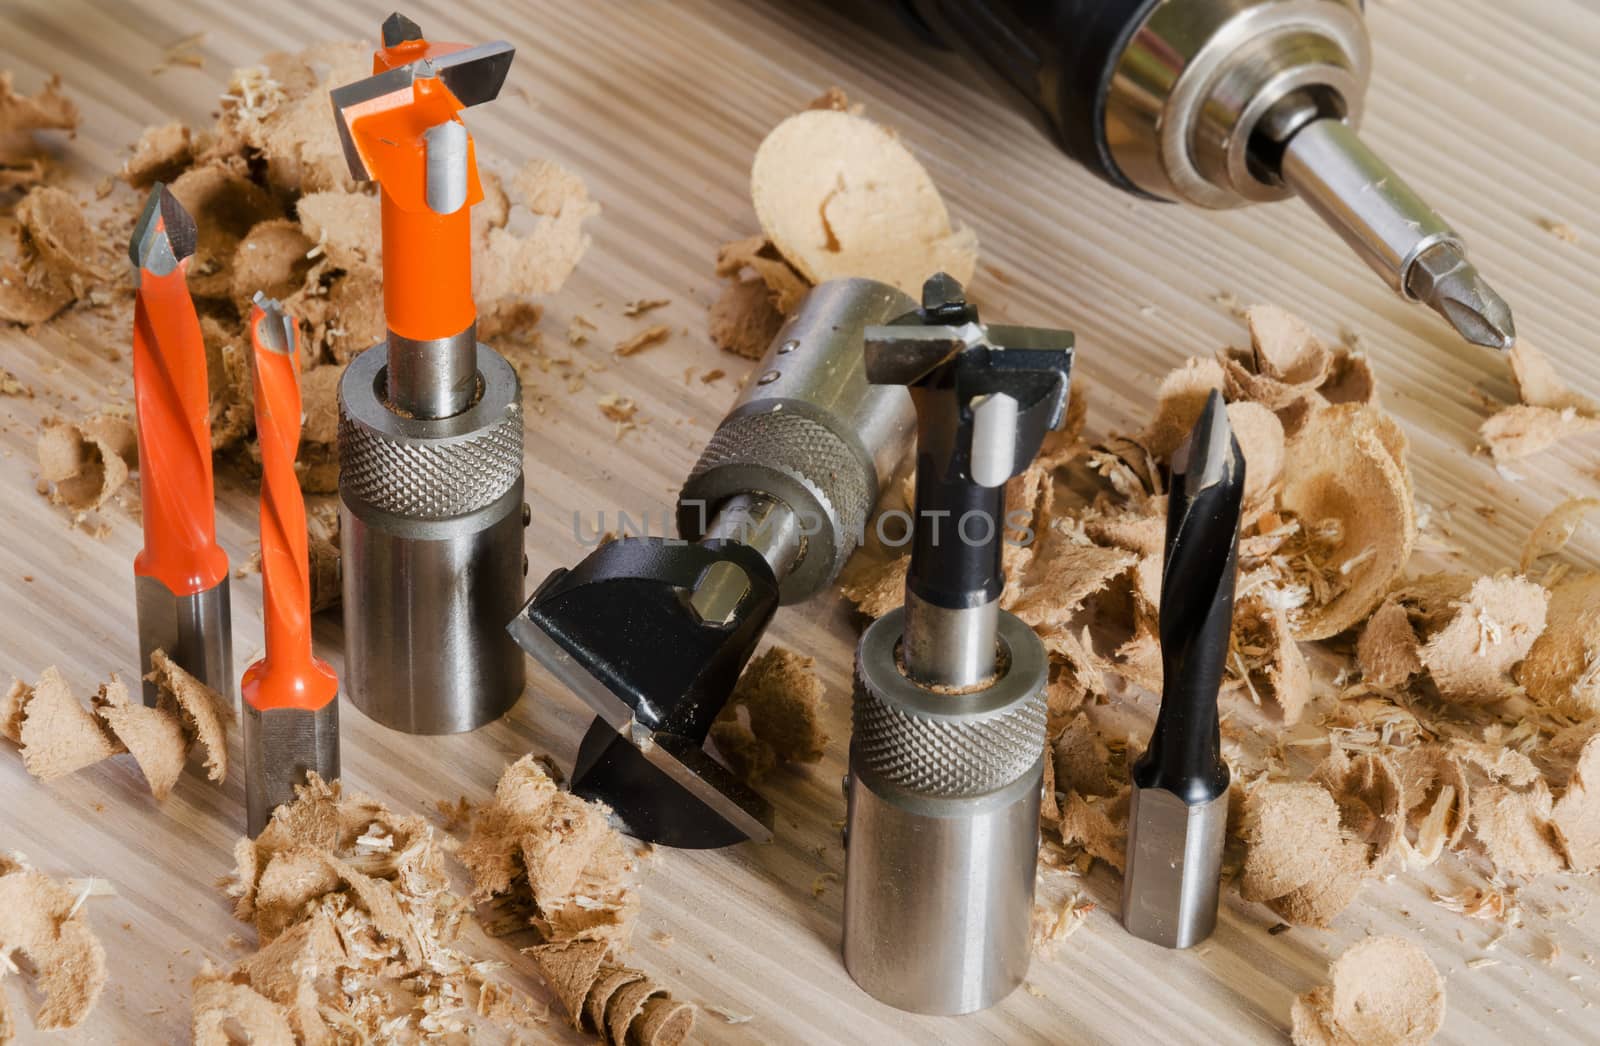 Machine tool cutters and drill bits by Sergey